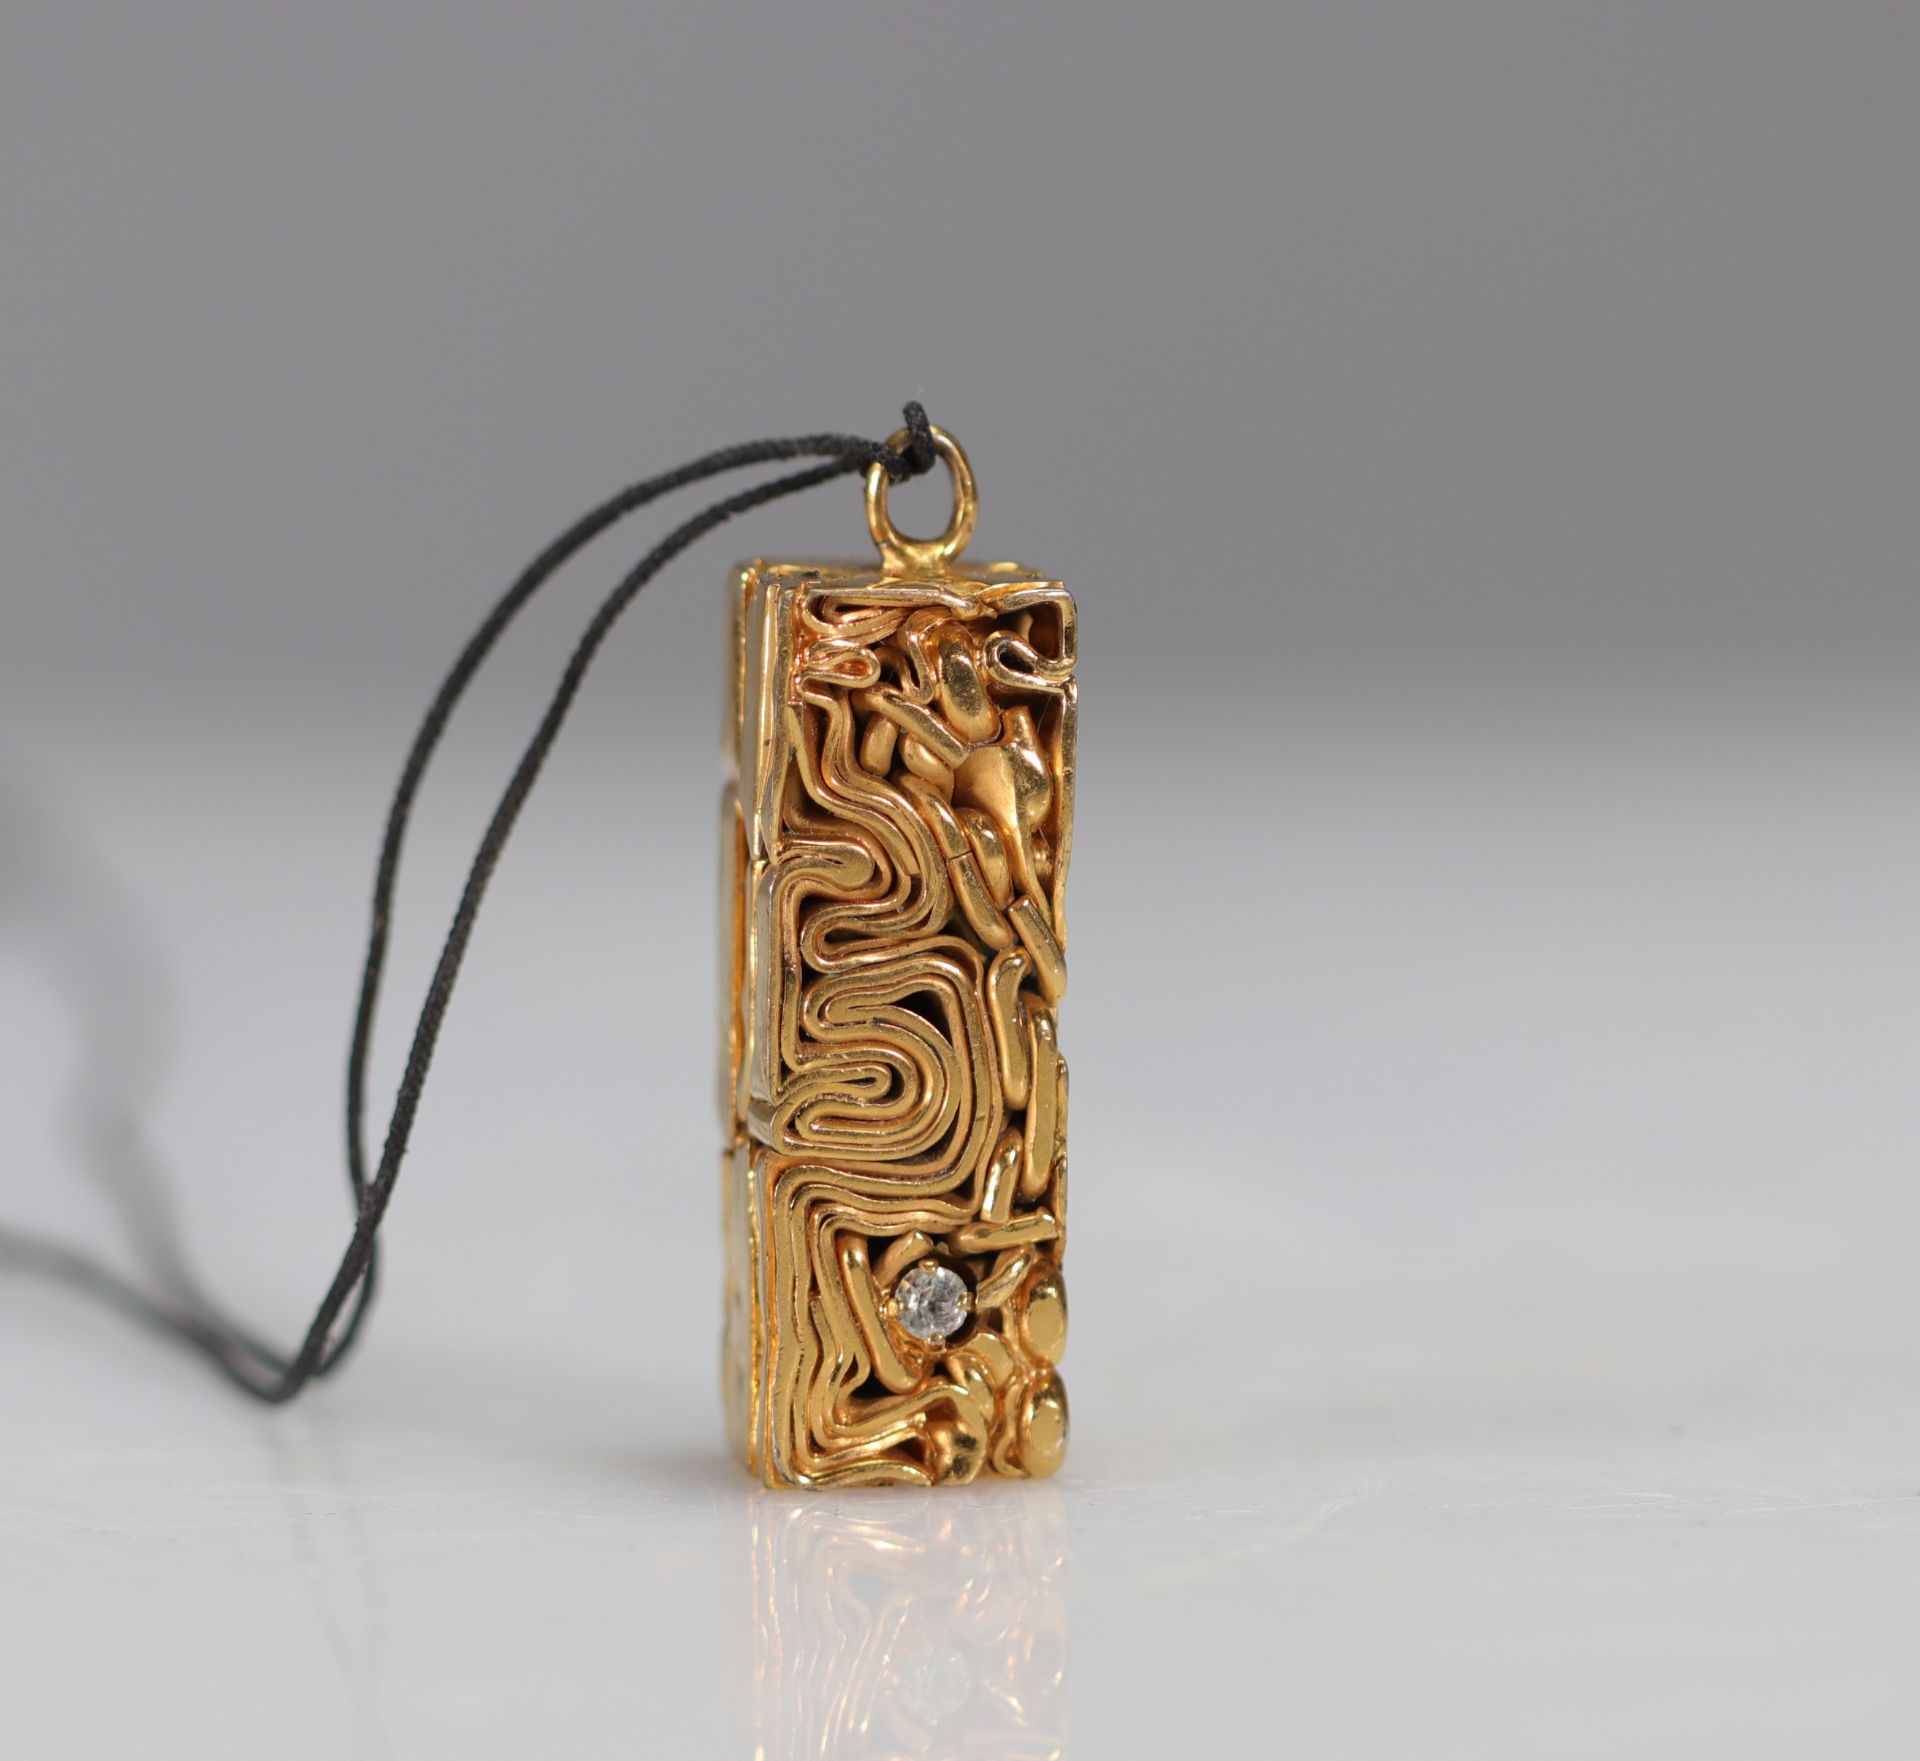 Caesar Baldaccini. Compression. Pendant made of gilded metal jewelry and compressed ceremonial stone